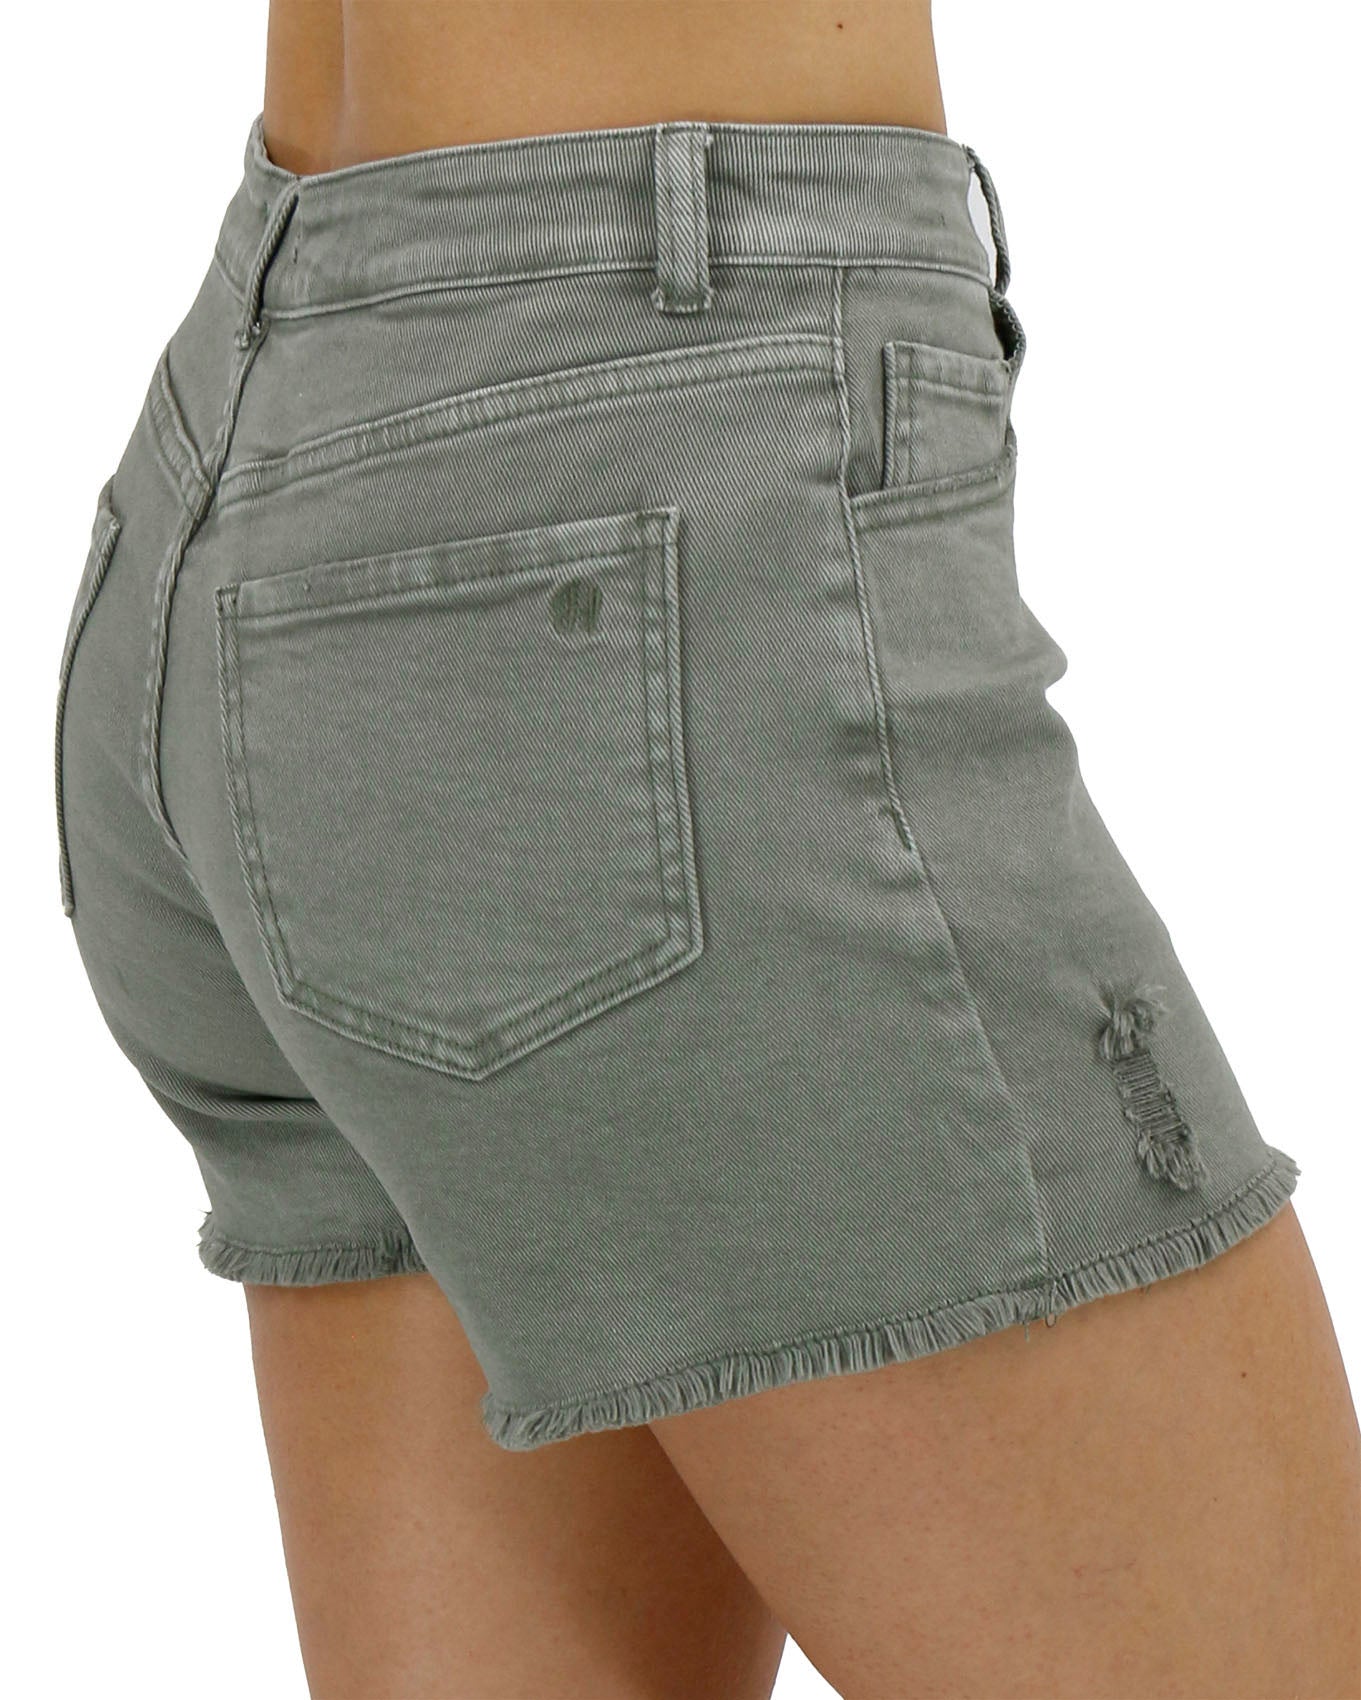 Olive Casual Colored Denim Shorts profile detail